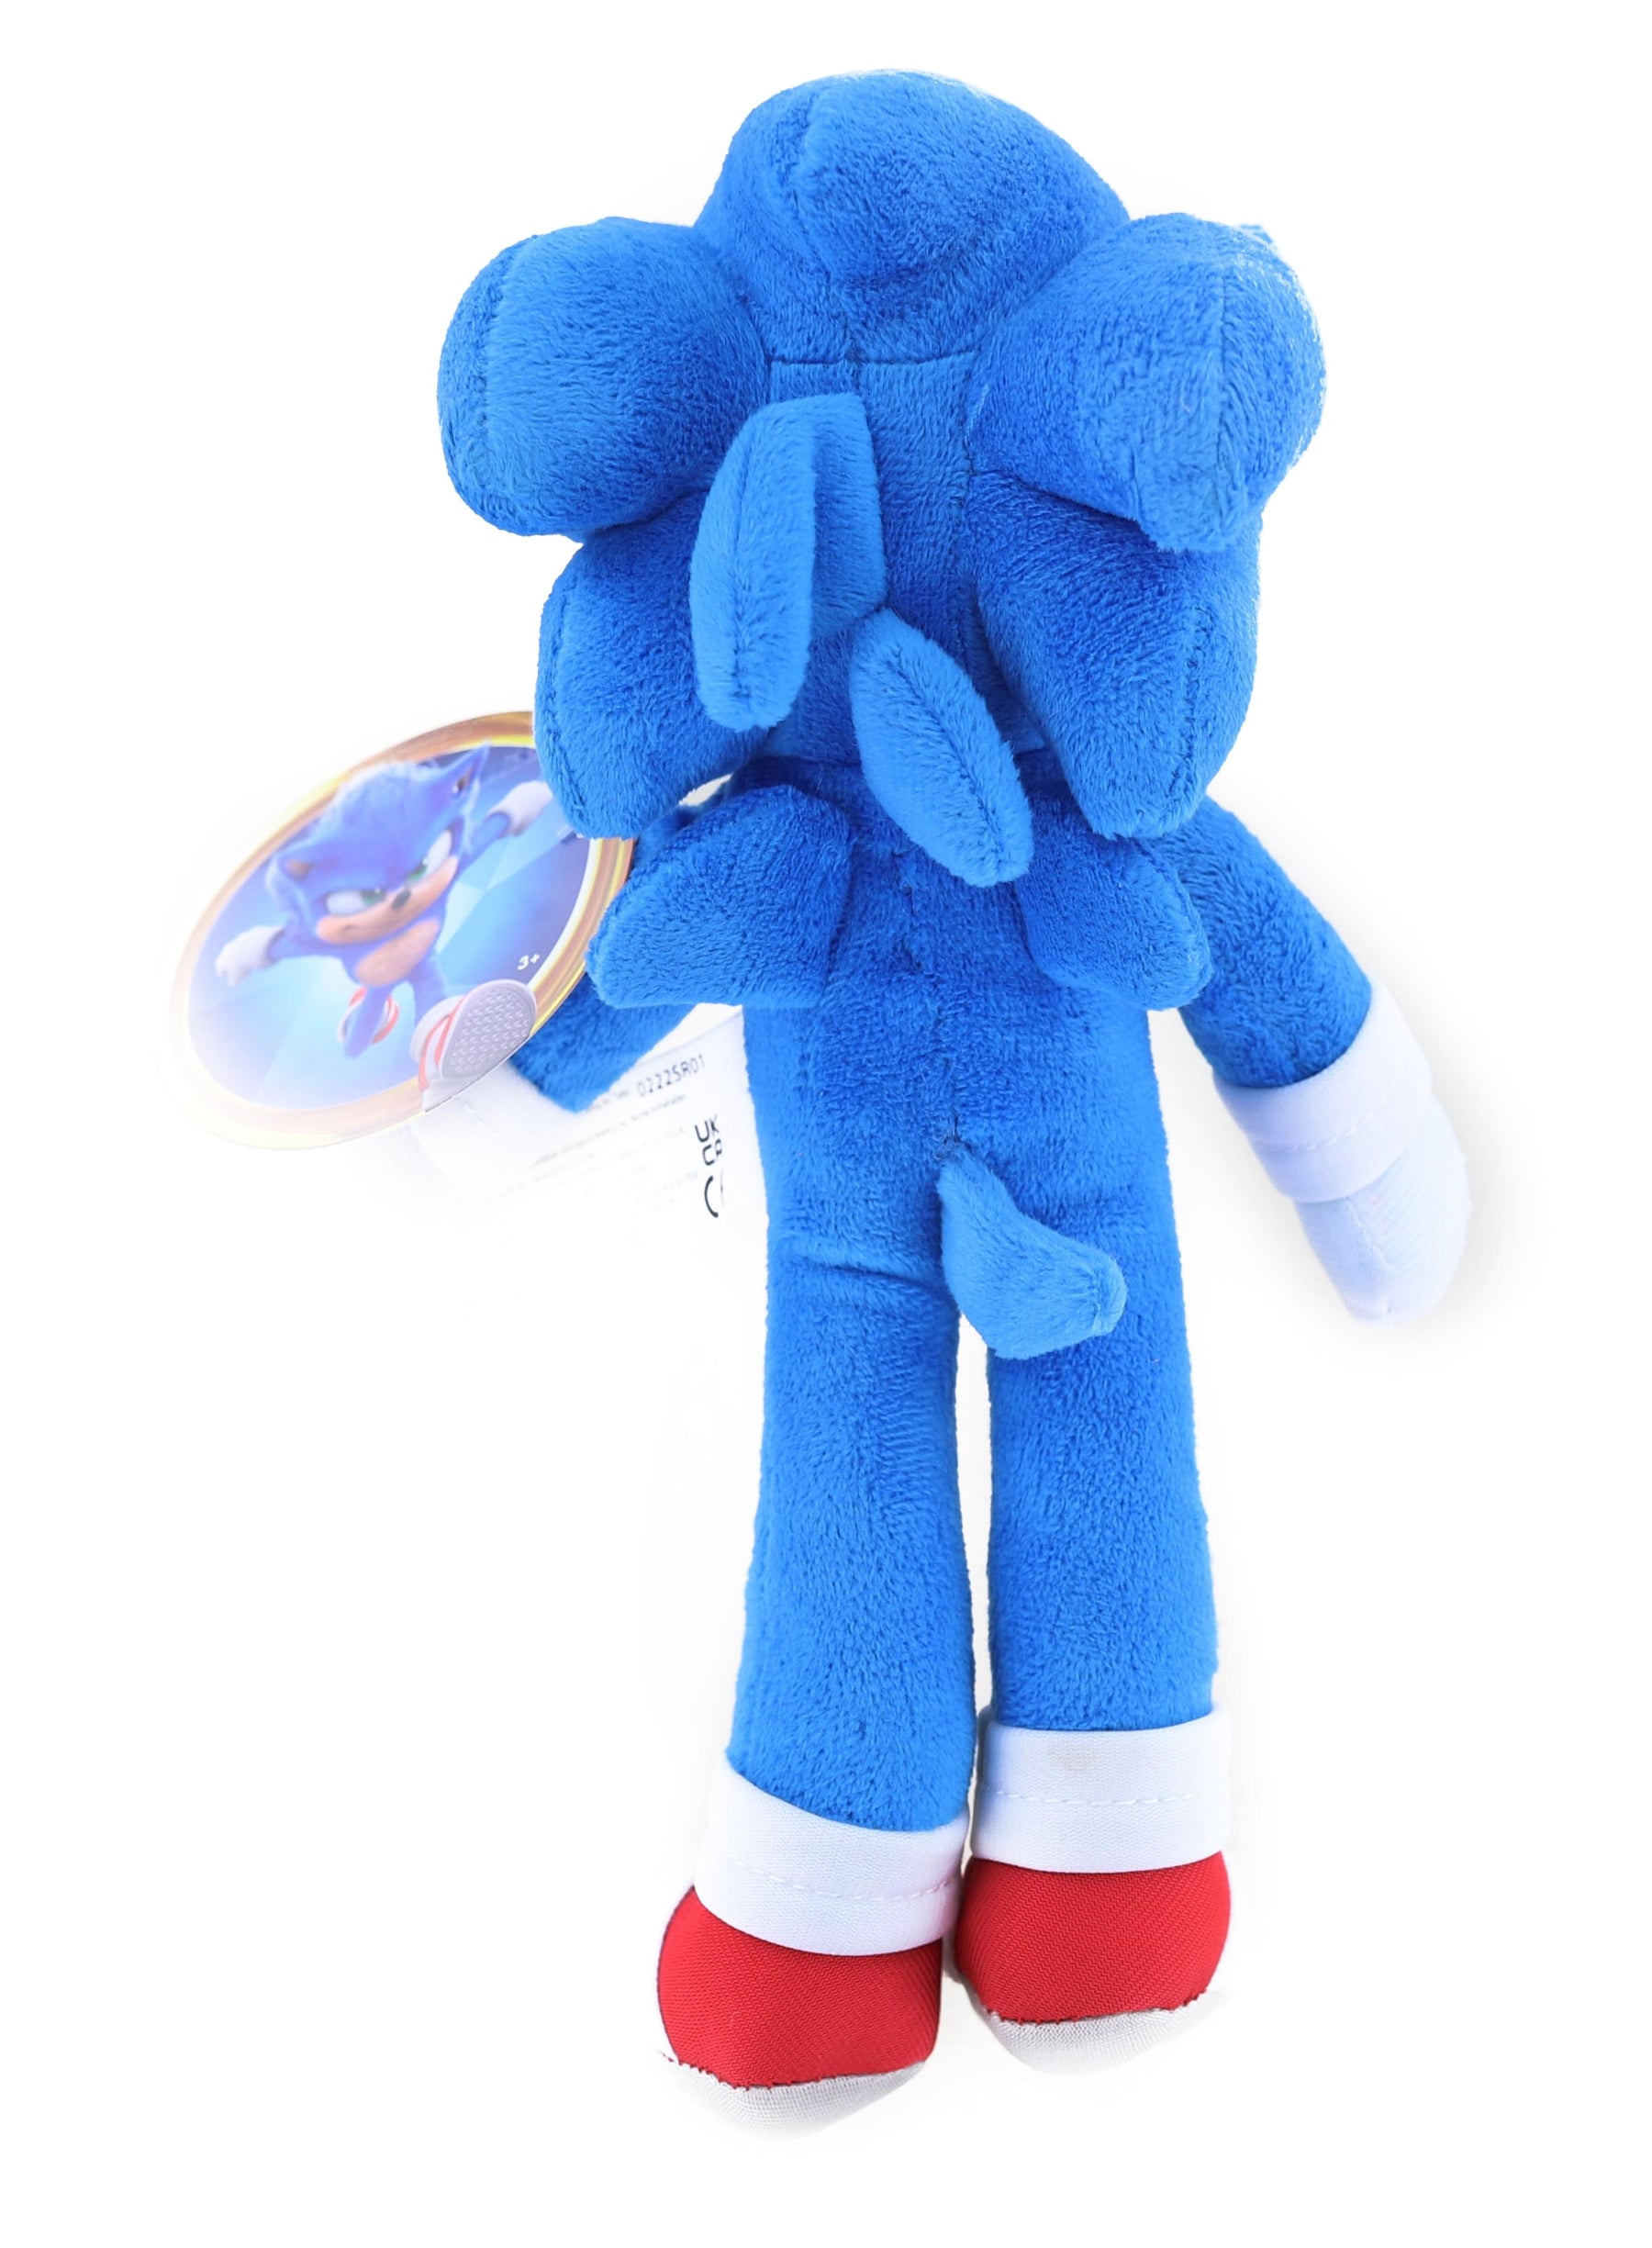  Sonic The Hedgehog 2 9-Inch Plush Collectible Toy 3